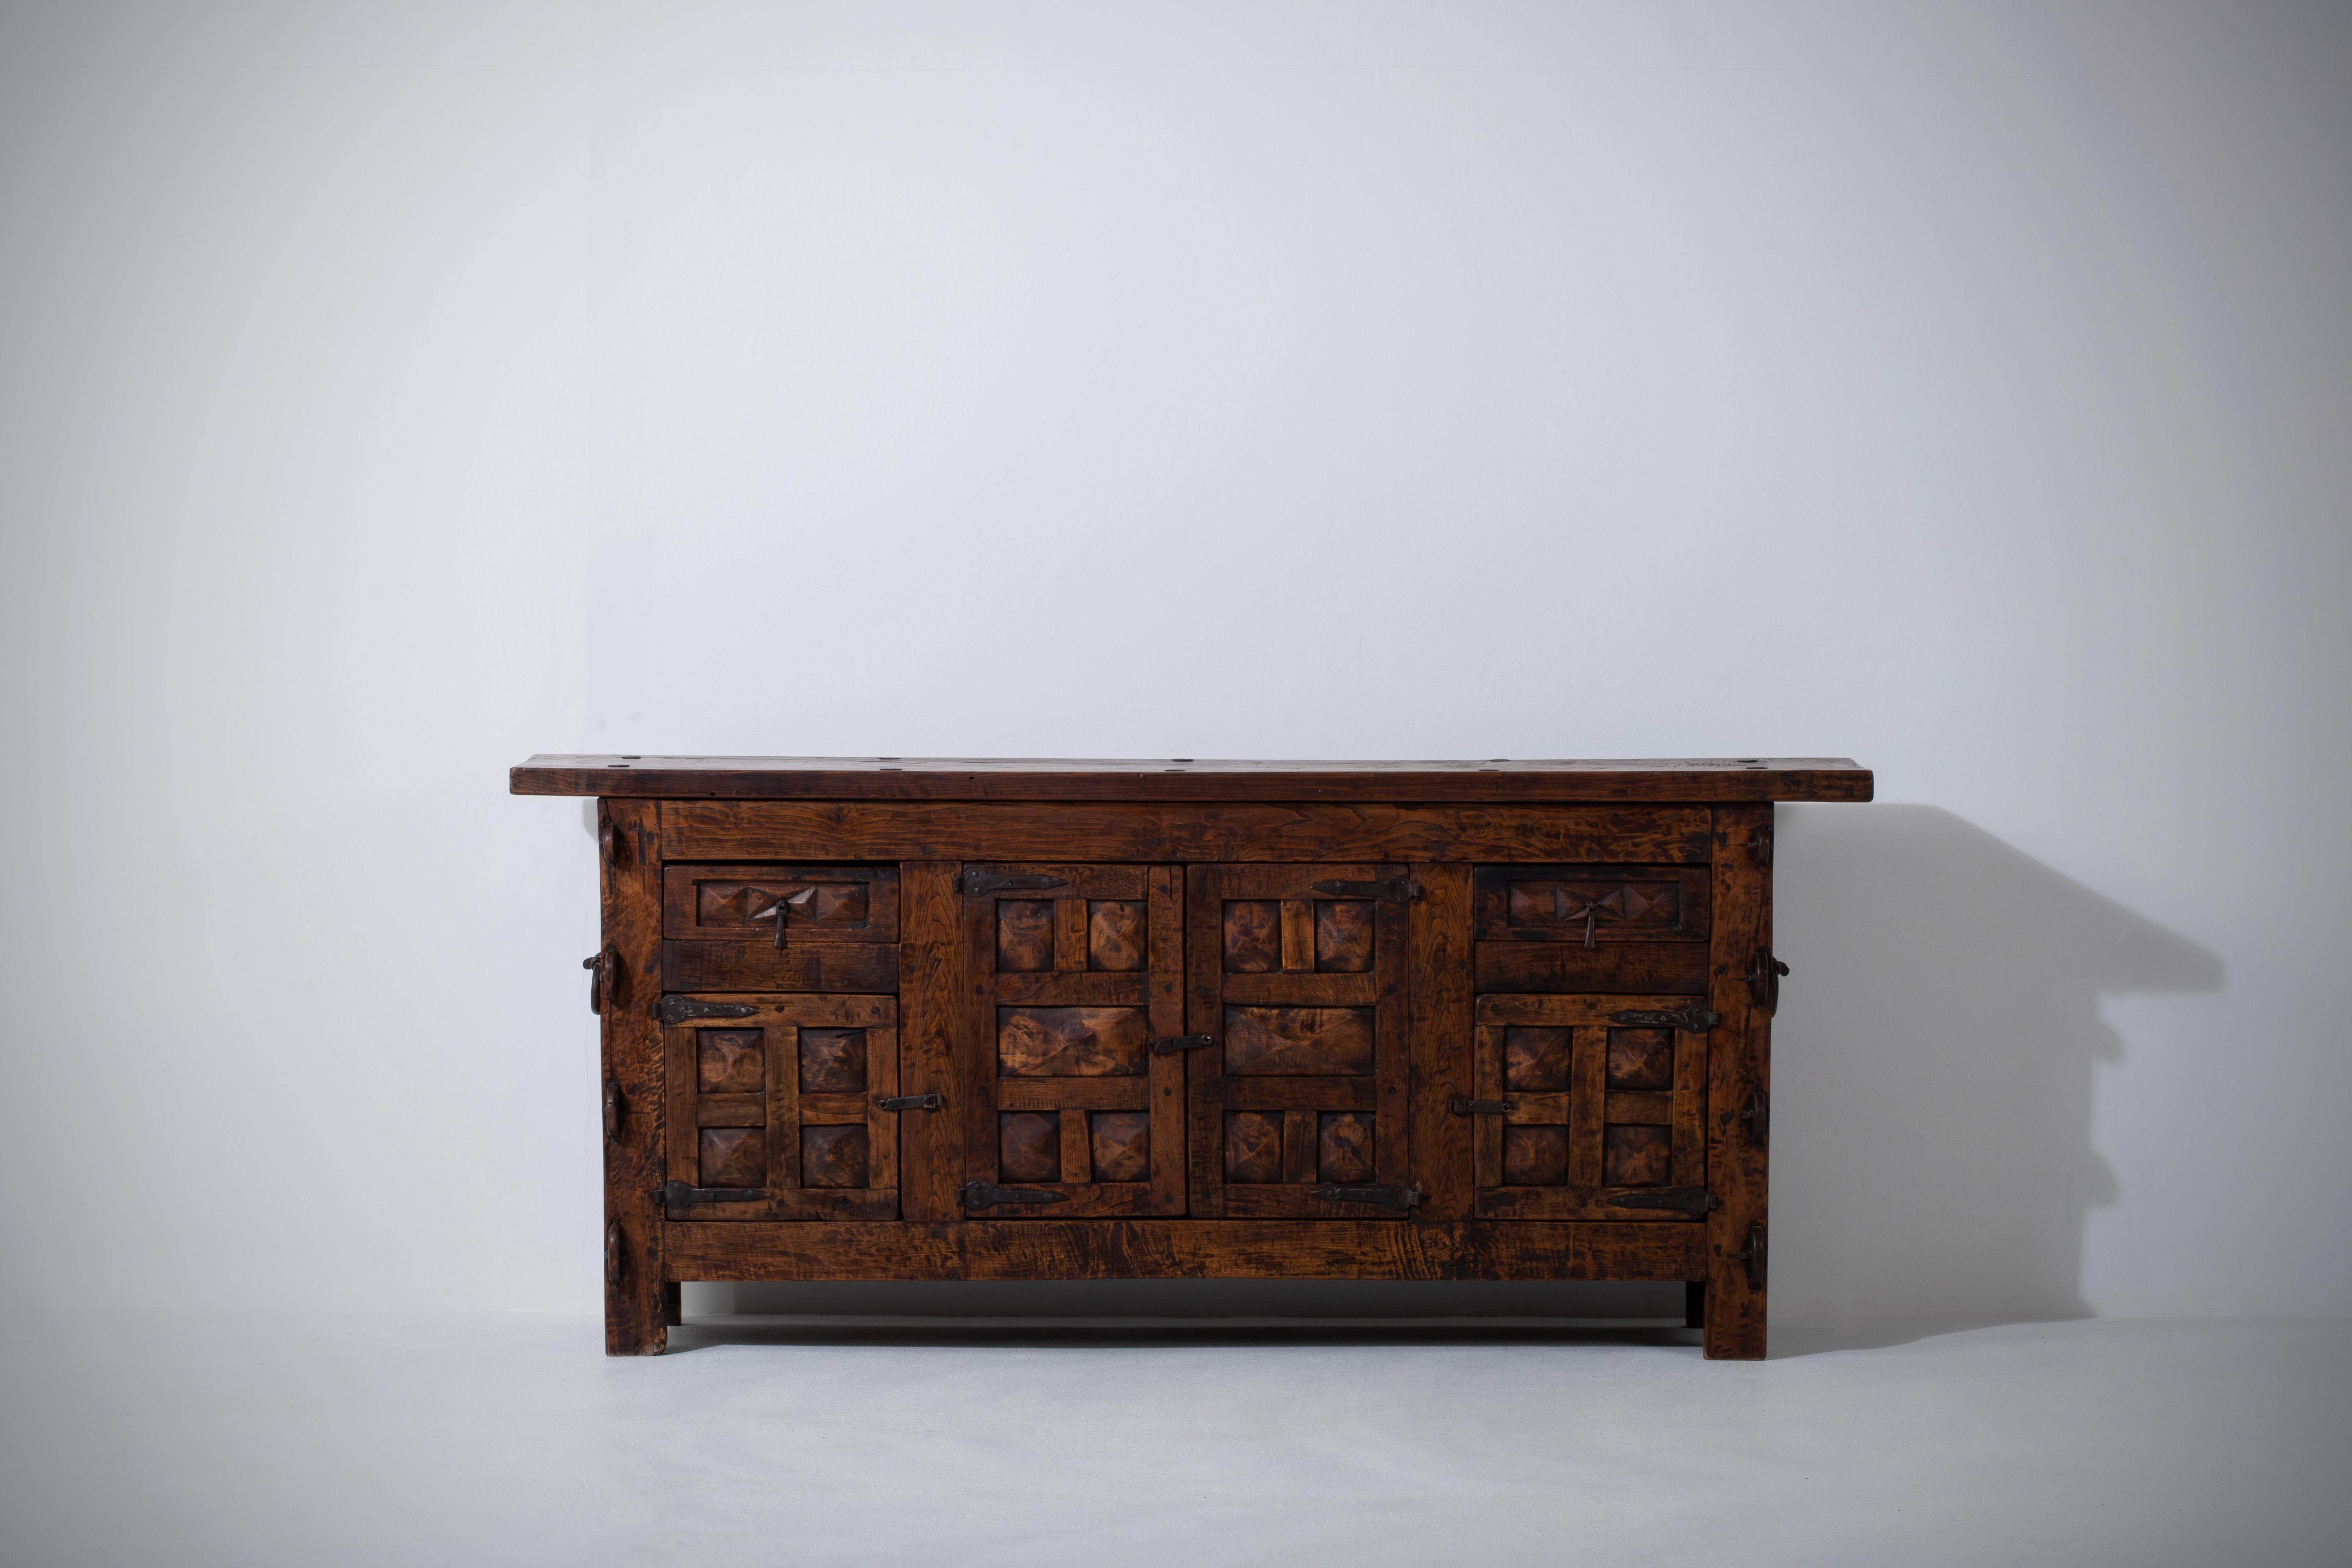 Rustic Armoire in solid oak, France, 18th century.
This old buffet was unearthed in a farm in the Vosges, it is an authentic piece of rustic furniture. Handcrafted in the 1800s, made from raw wooden planks.
Nice Brutalist object, wabi-sabi spirit.